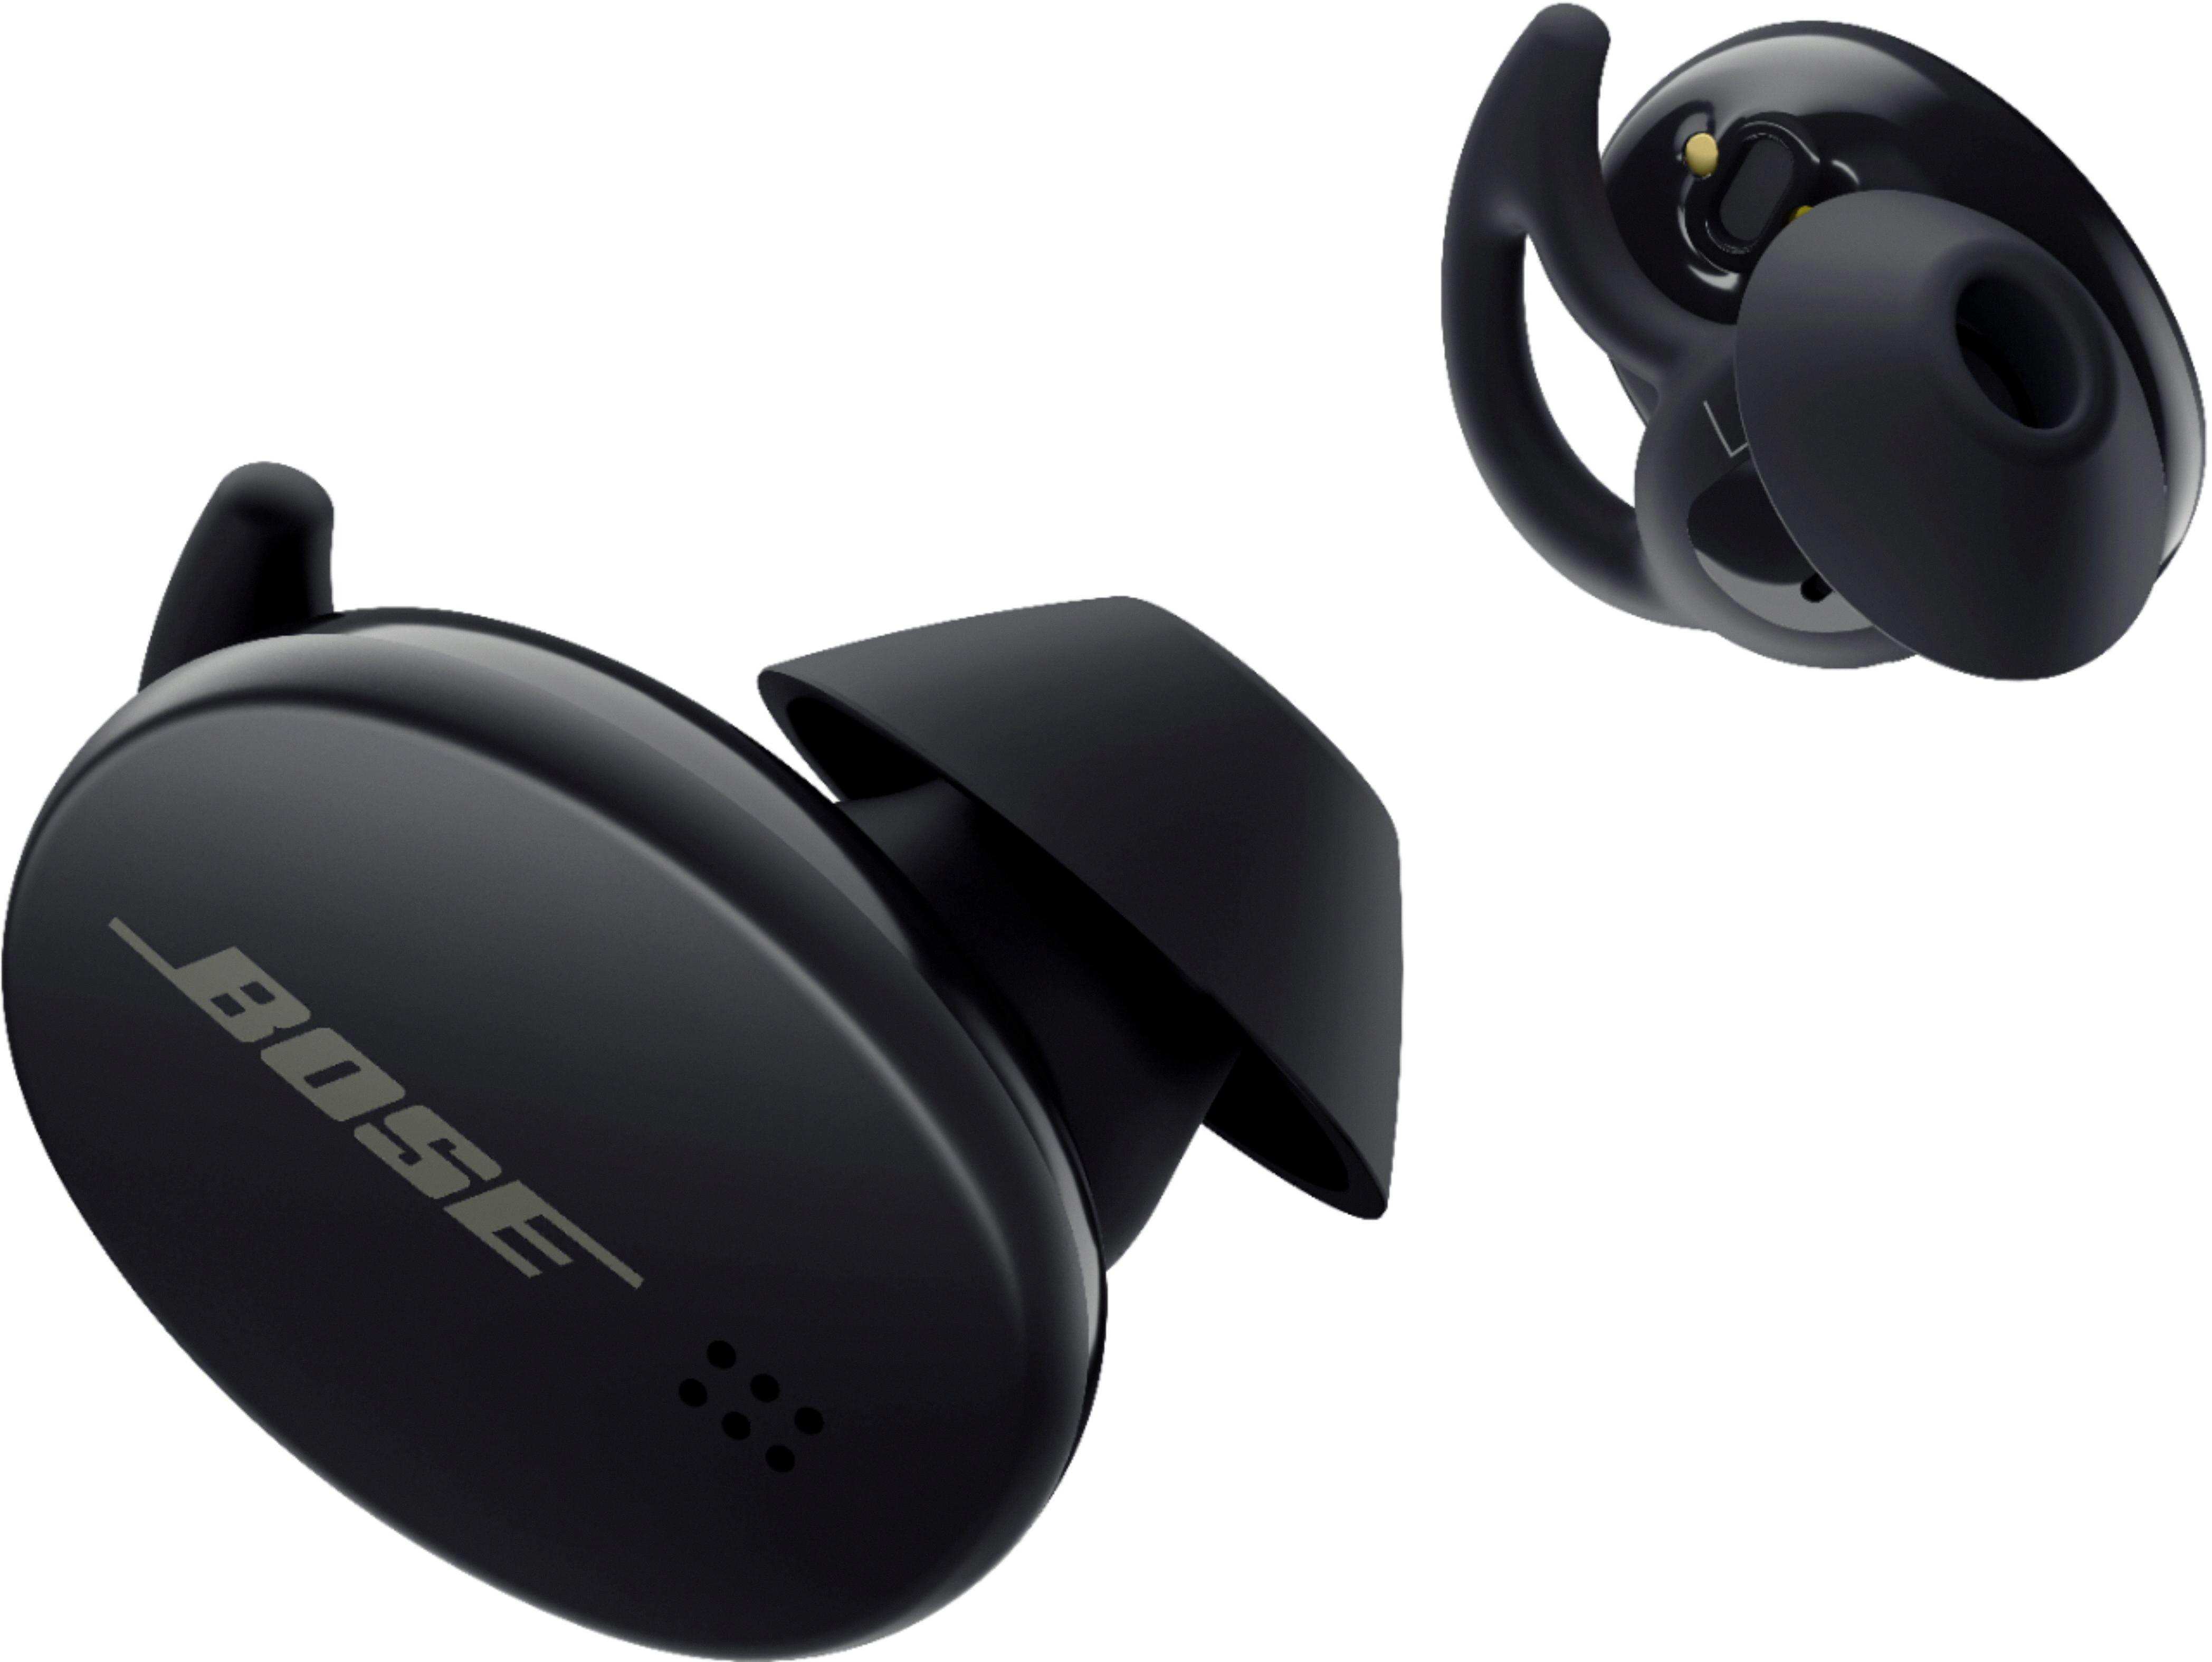 How to Pair Bose Earbuds for Audio Enjoyment 13